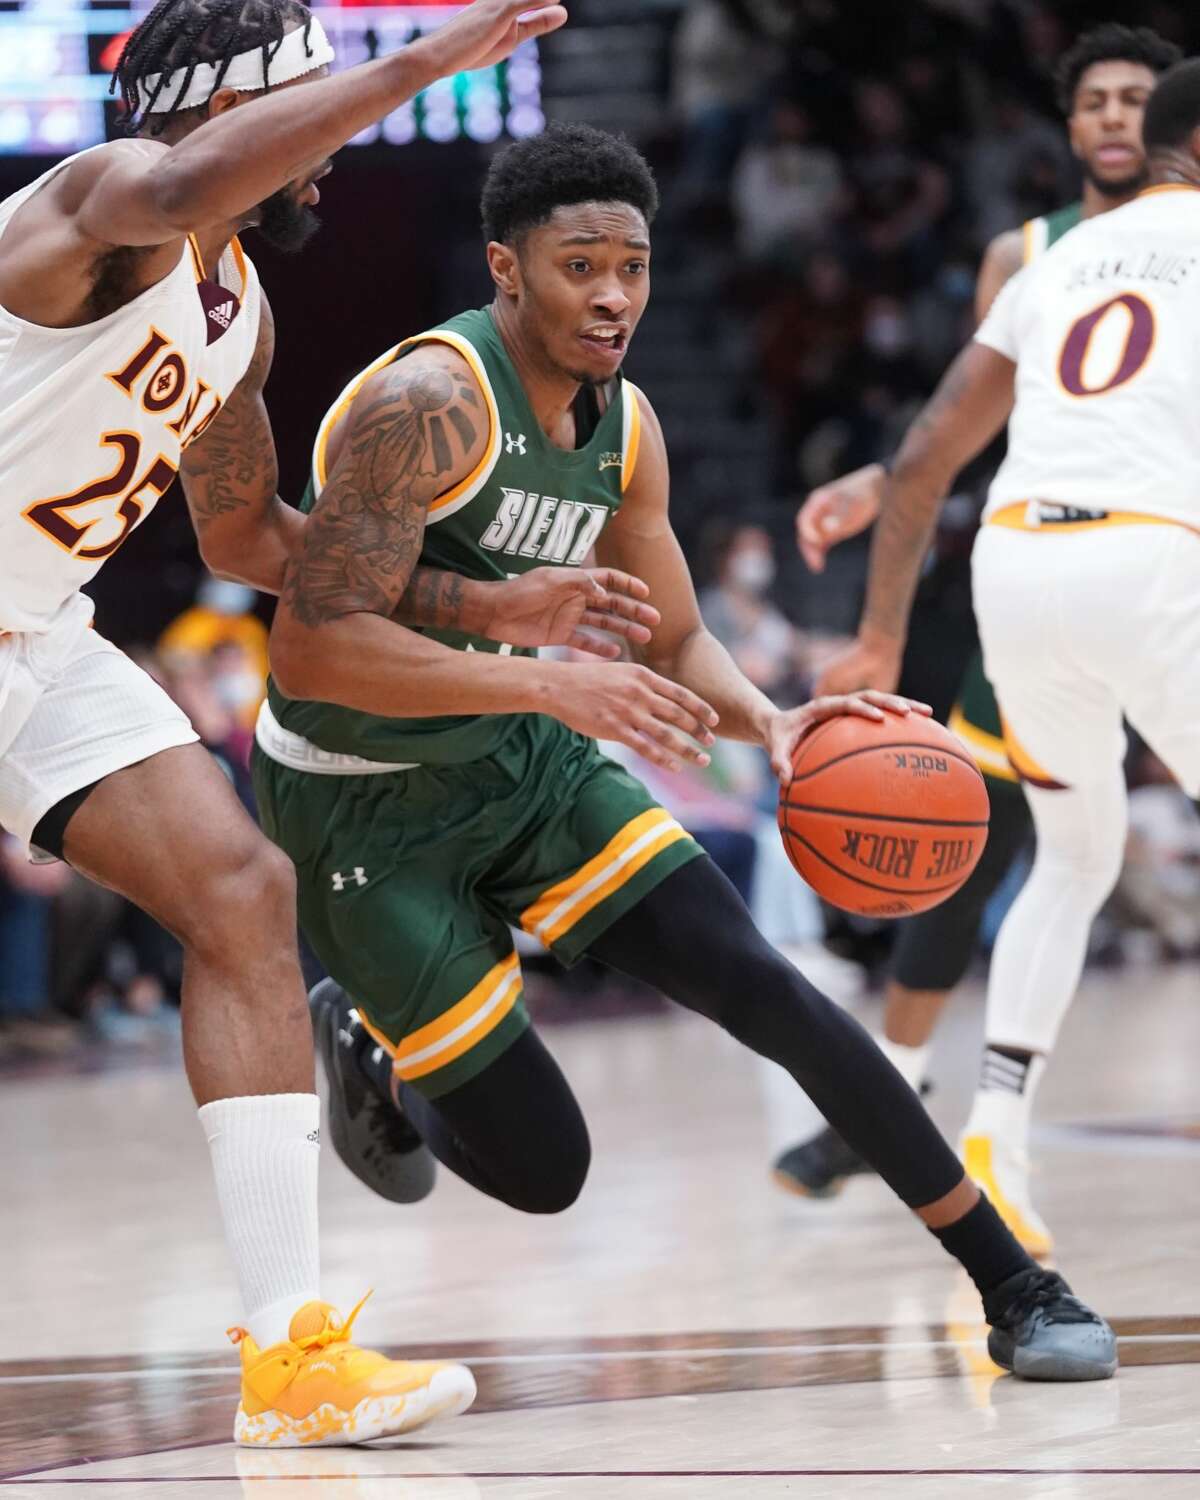 Siena's Colby Rogers drives against Iona's Tyson Jolly (25) during their game on Tuesday, January 25, 2022. Rogers led the Saints with 17 points.